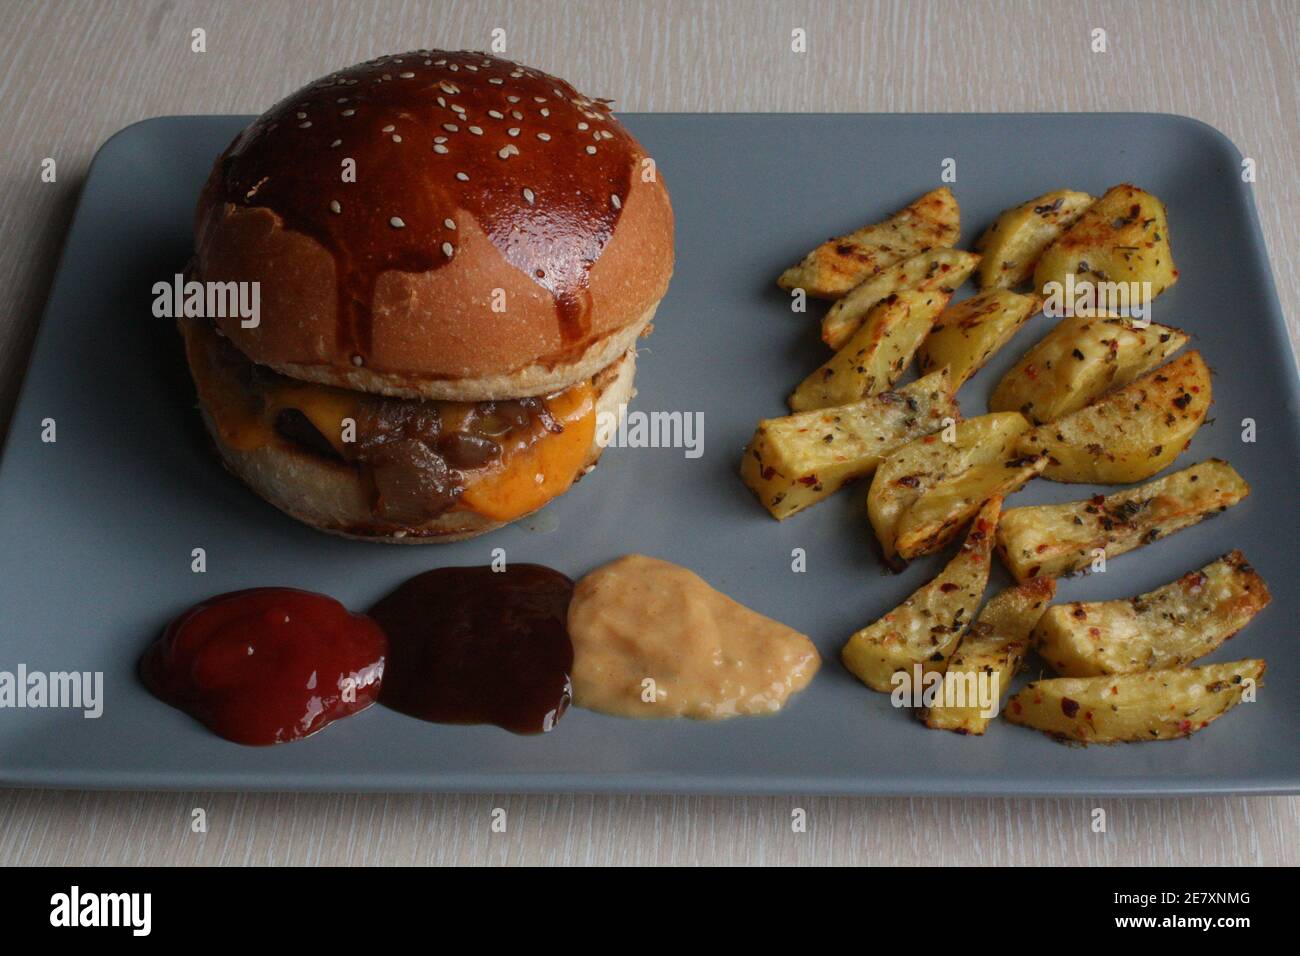 homemade hamburger with baked potatoes, grilled beef. some areas are out of focus. selective focuse on hamburger Stock Photo